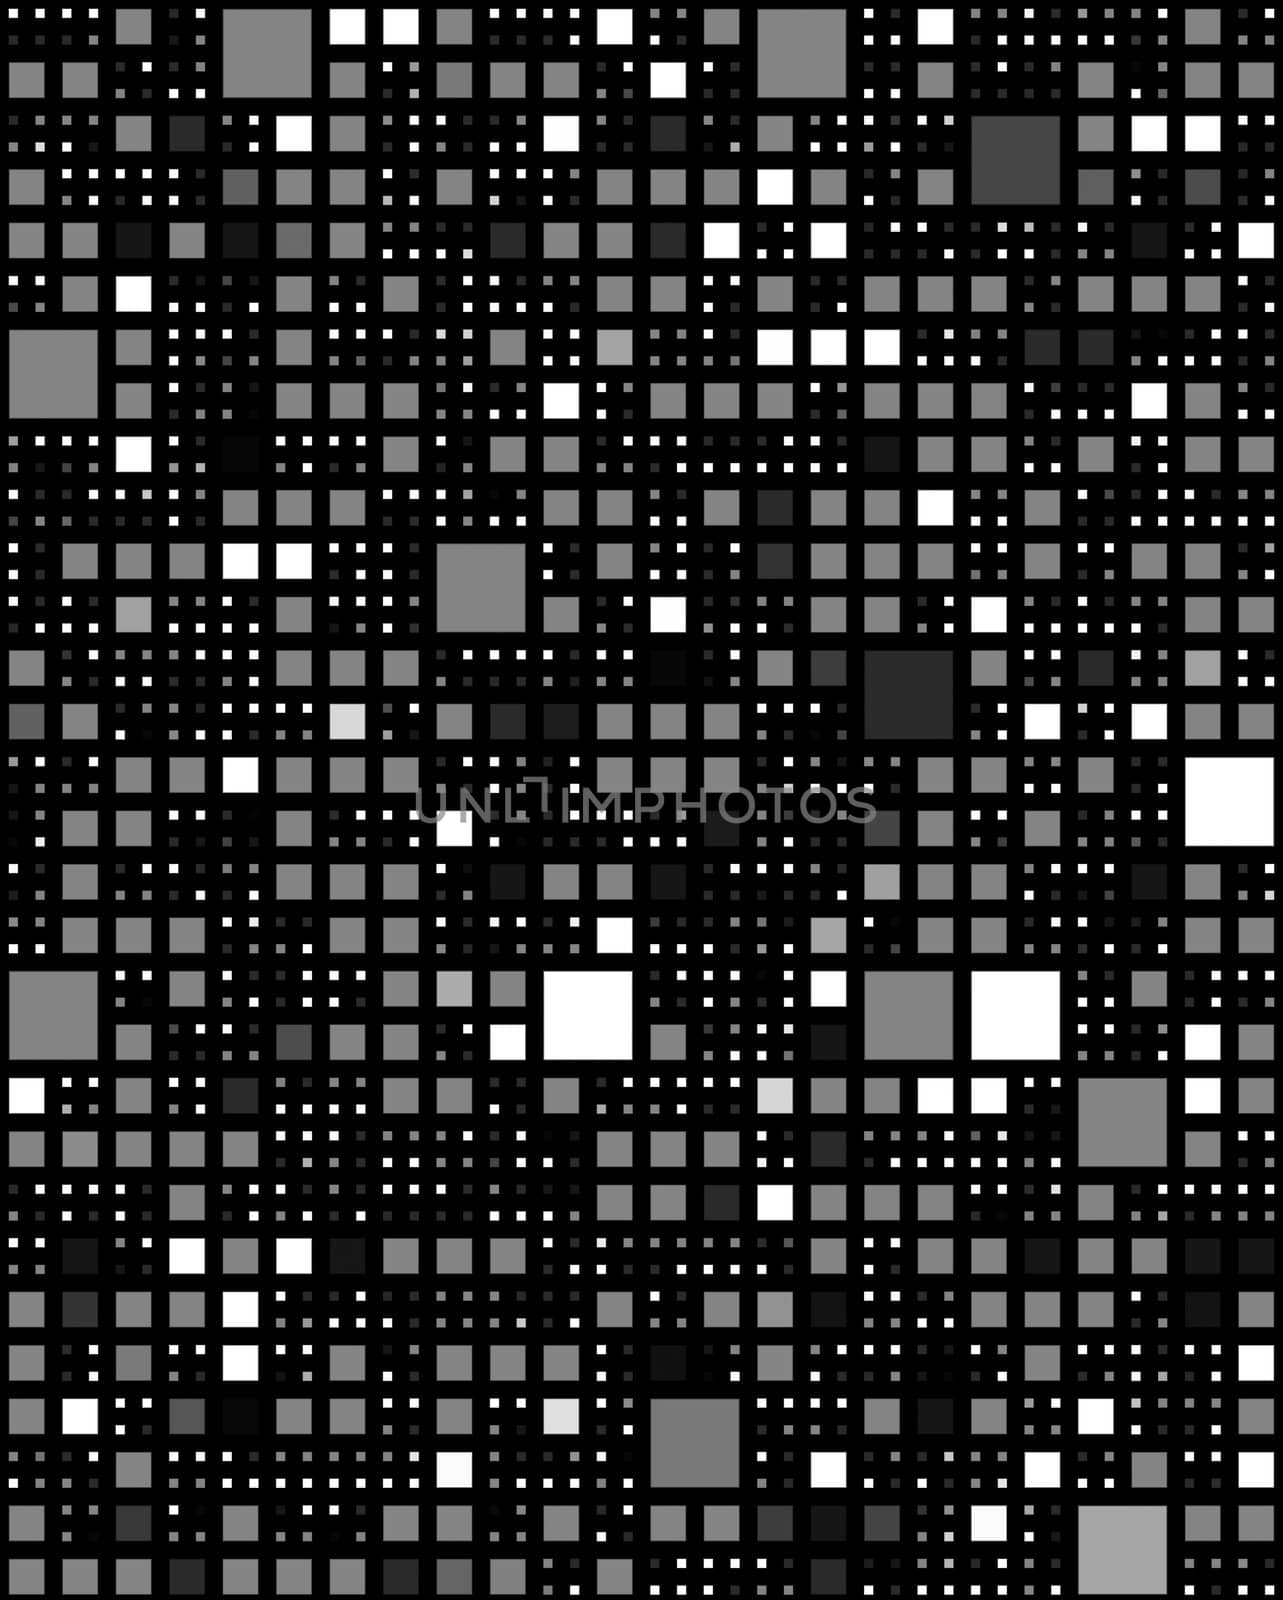 monochrome seamless texture of black to white squares in different sizes